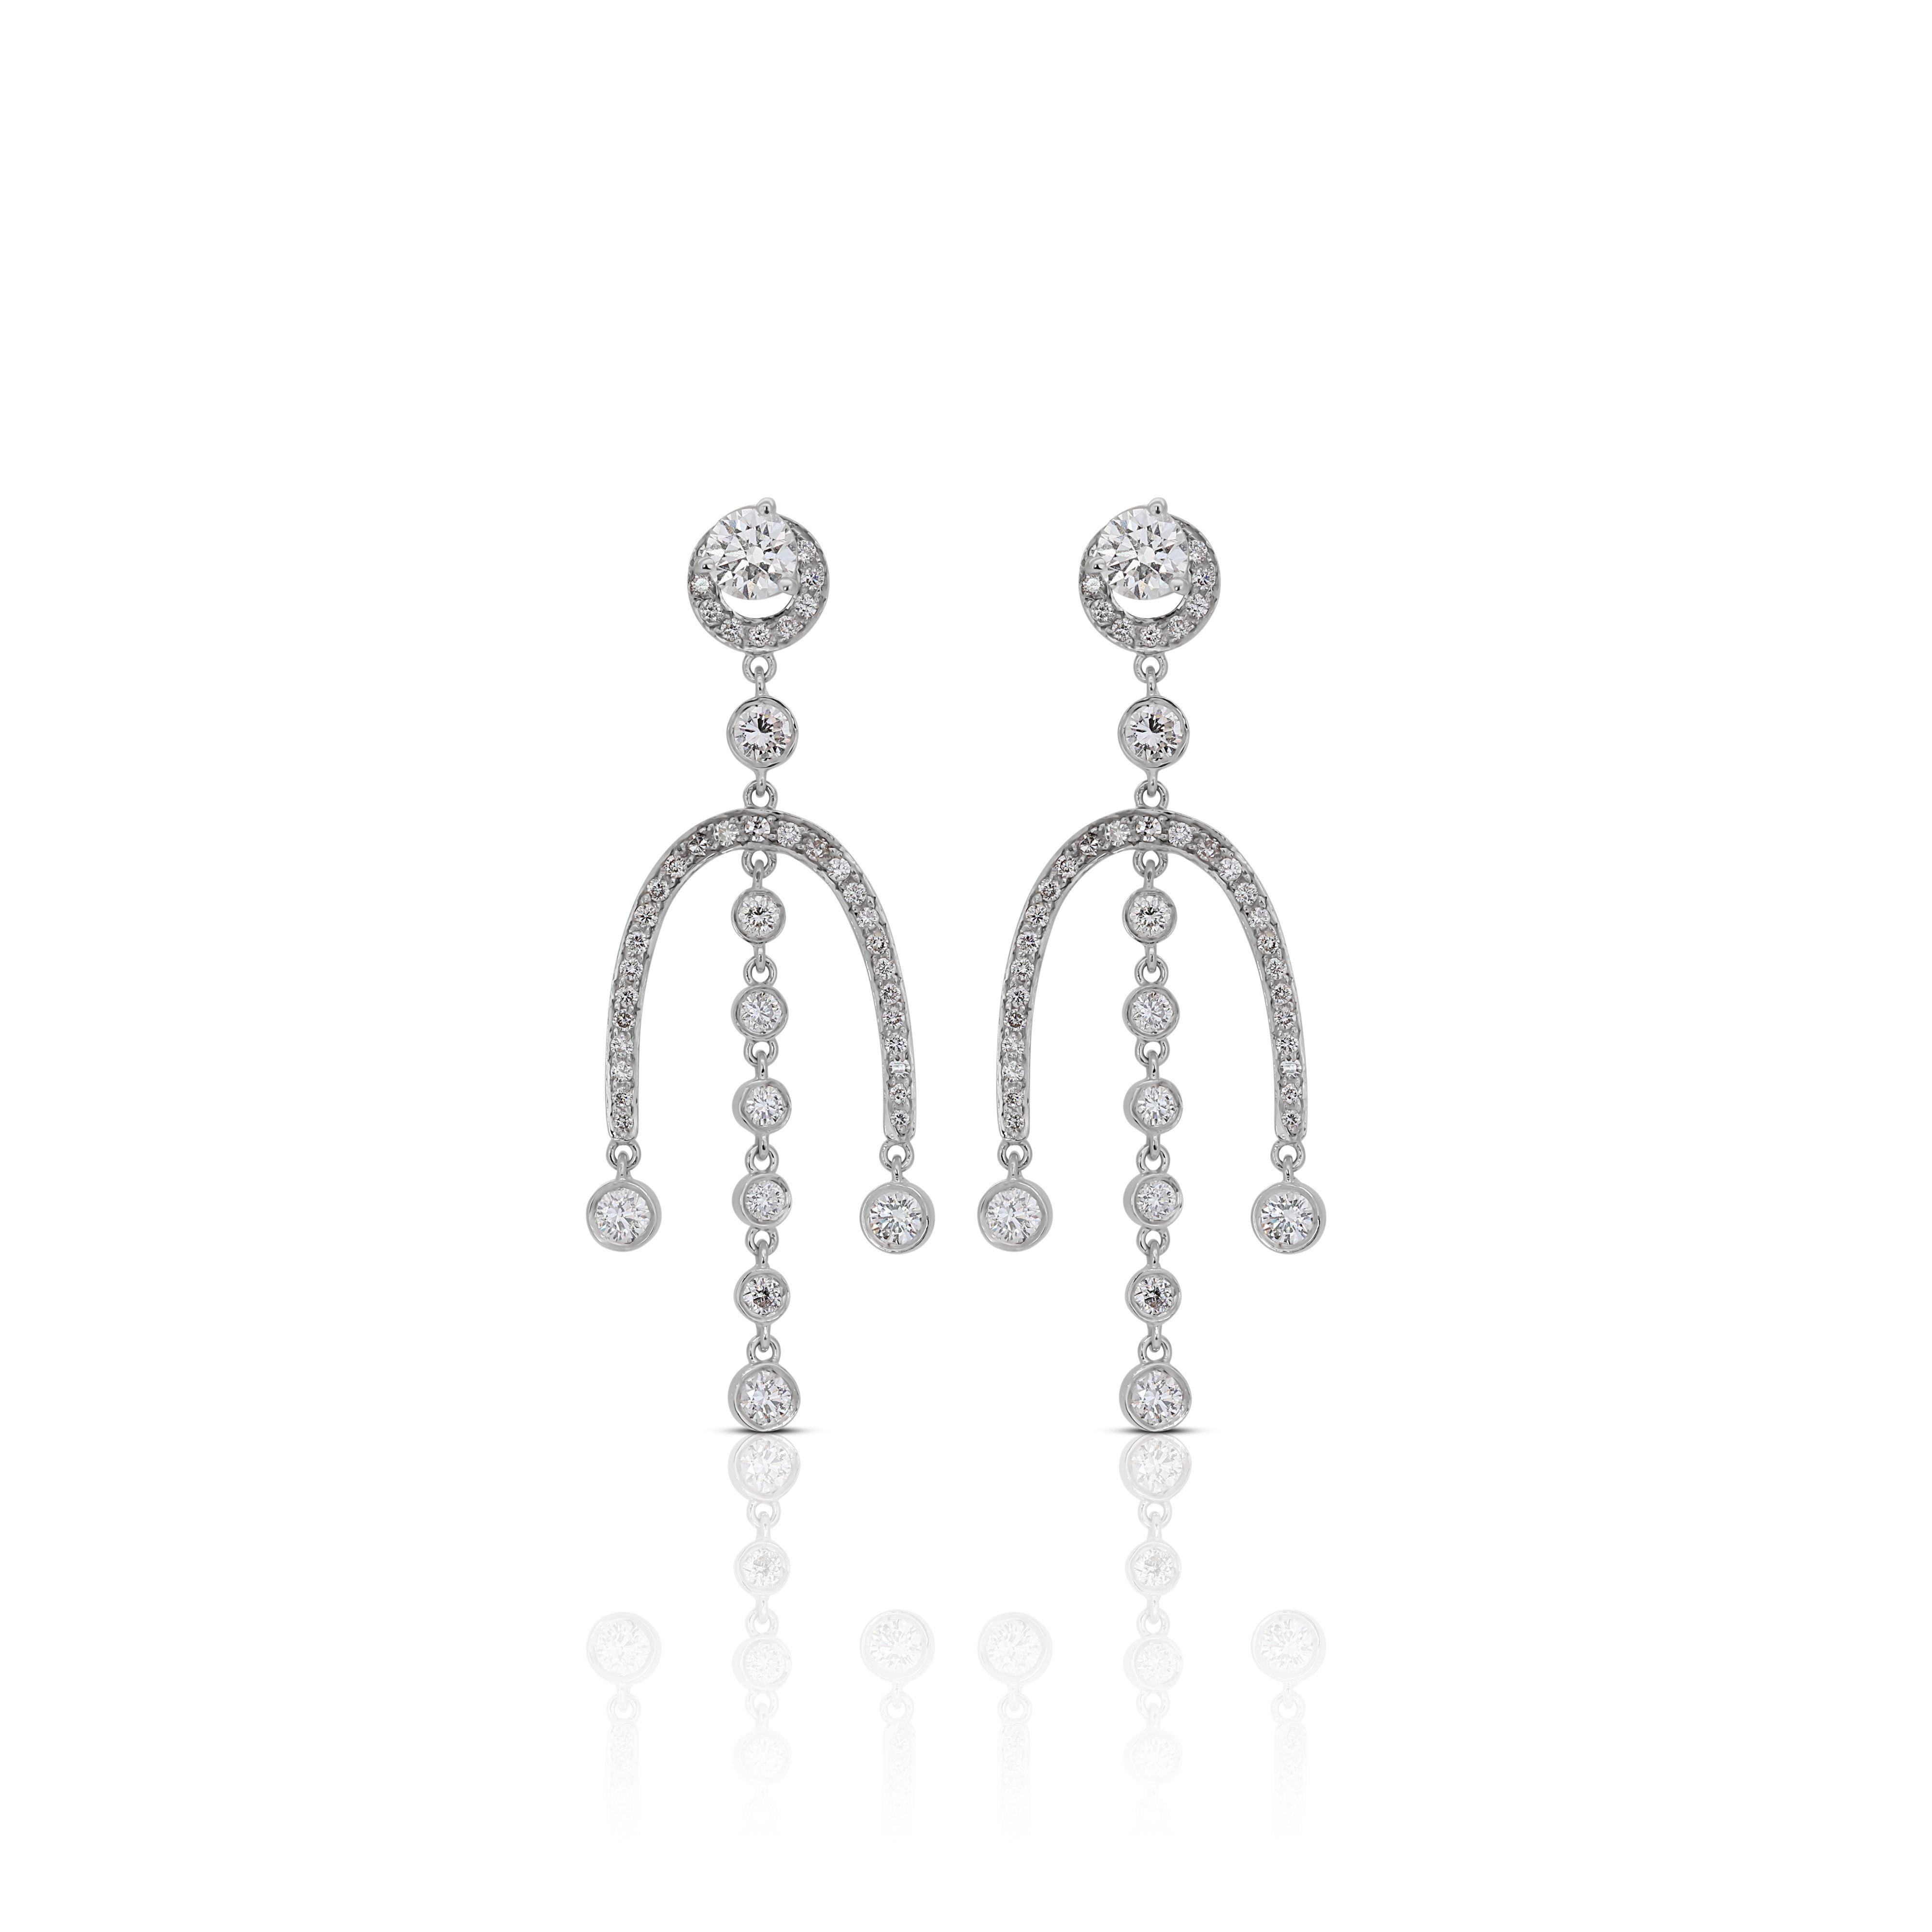 Crafted with precision, the 18K white gold setting provides a lustrous and modern backdrop for the diamonds, enhancing their brilliance and creating a luxurious aesthetic. The elegant and elongated design of the dangling earrings exudes a sense of